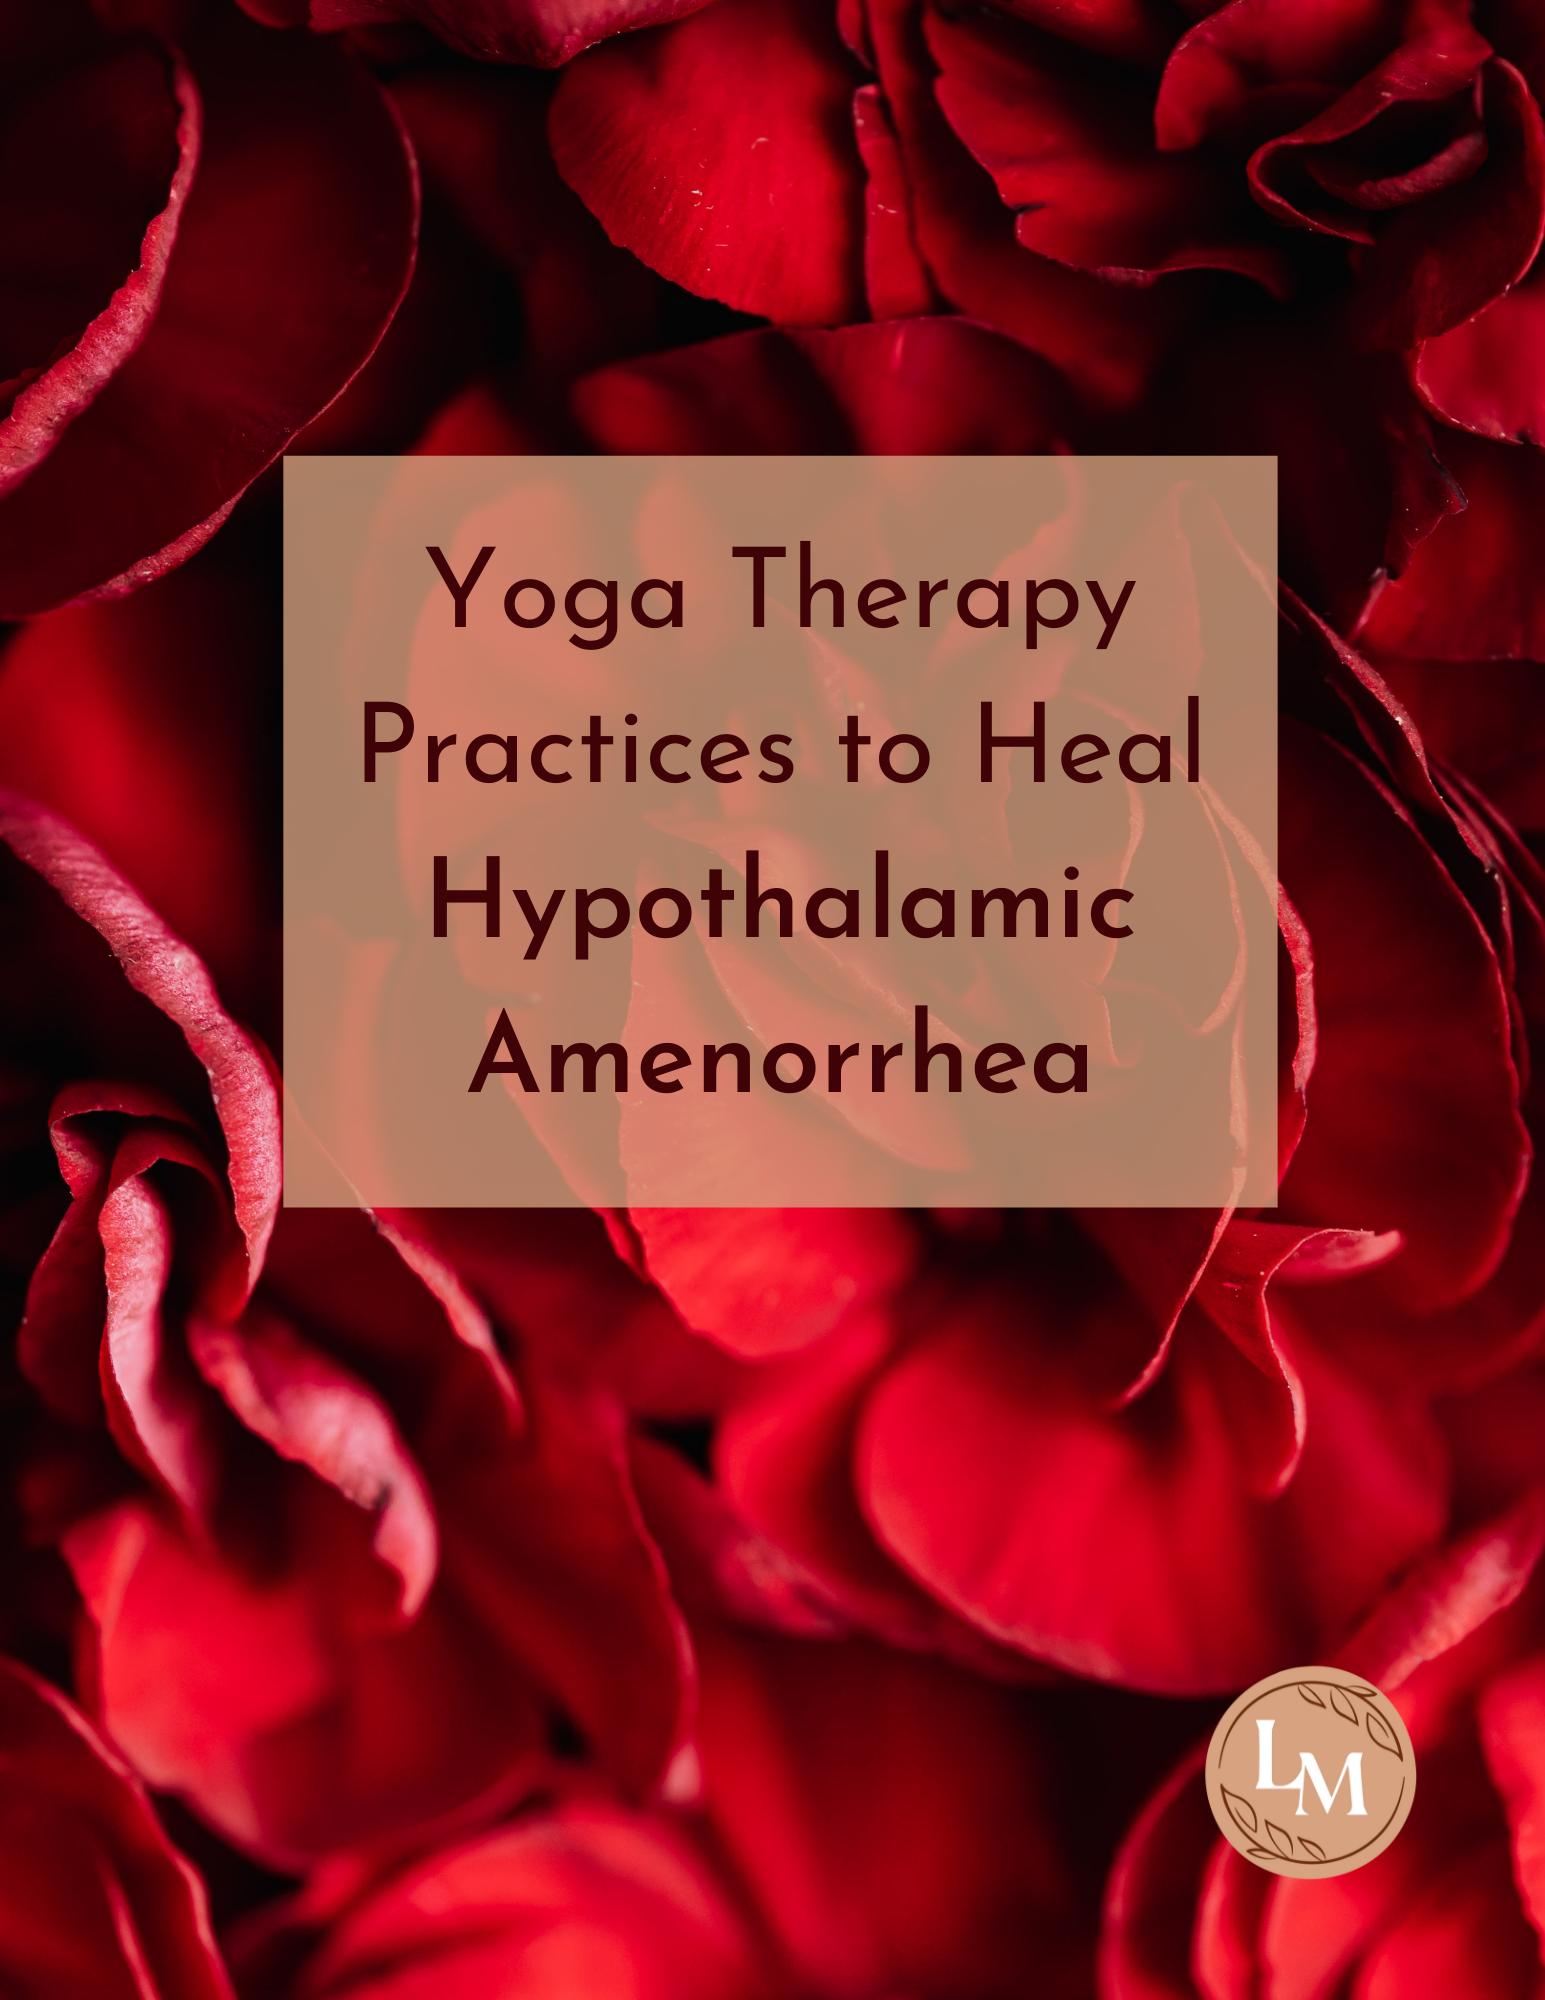 Free E-book: Yoga Therapy Practices to Heal Hypothalamic Amenorrhea